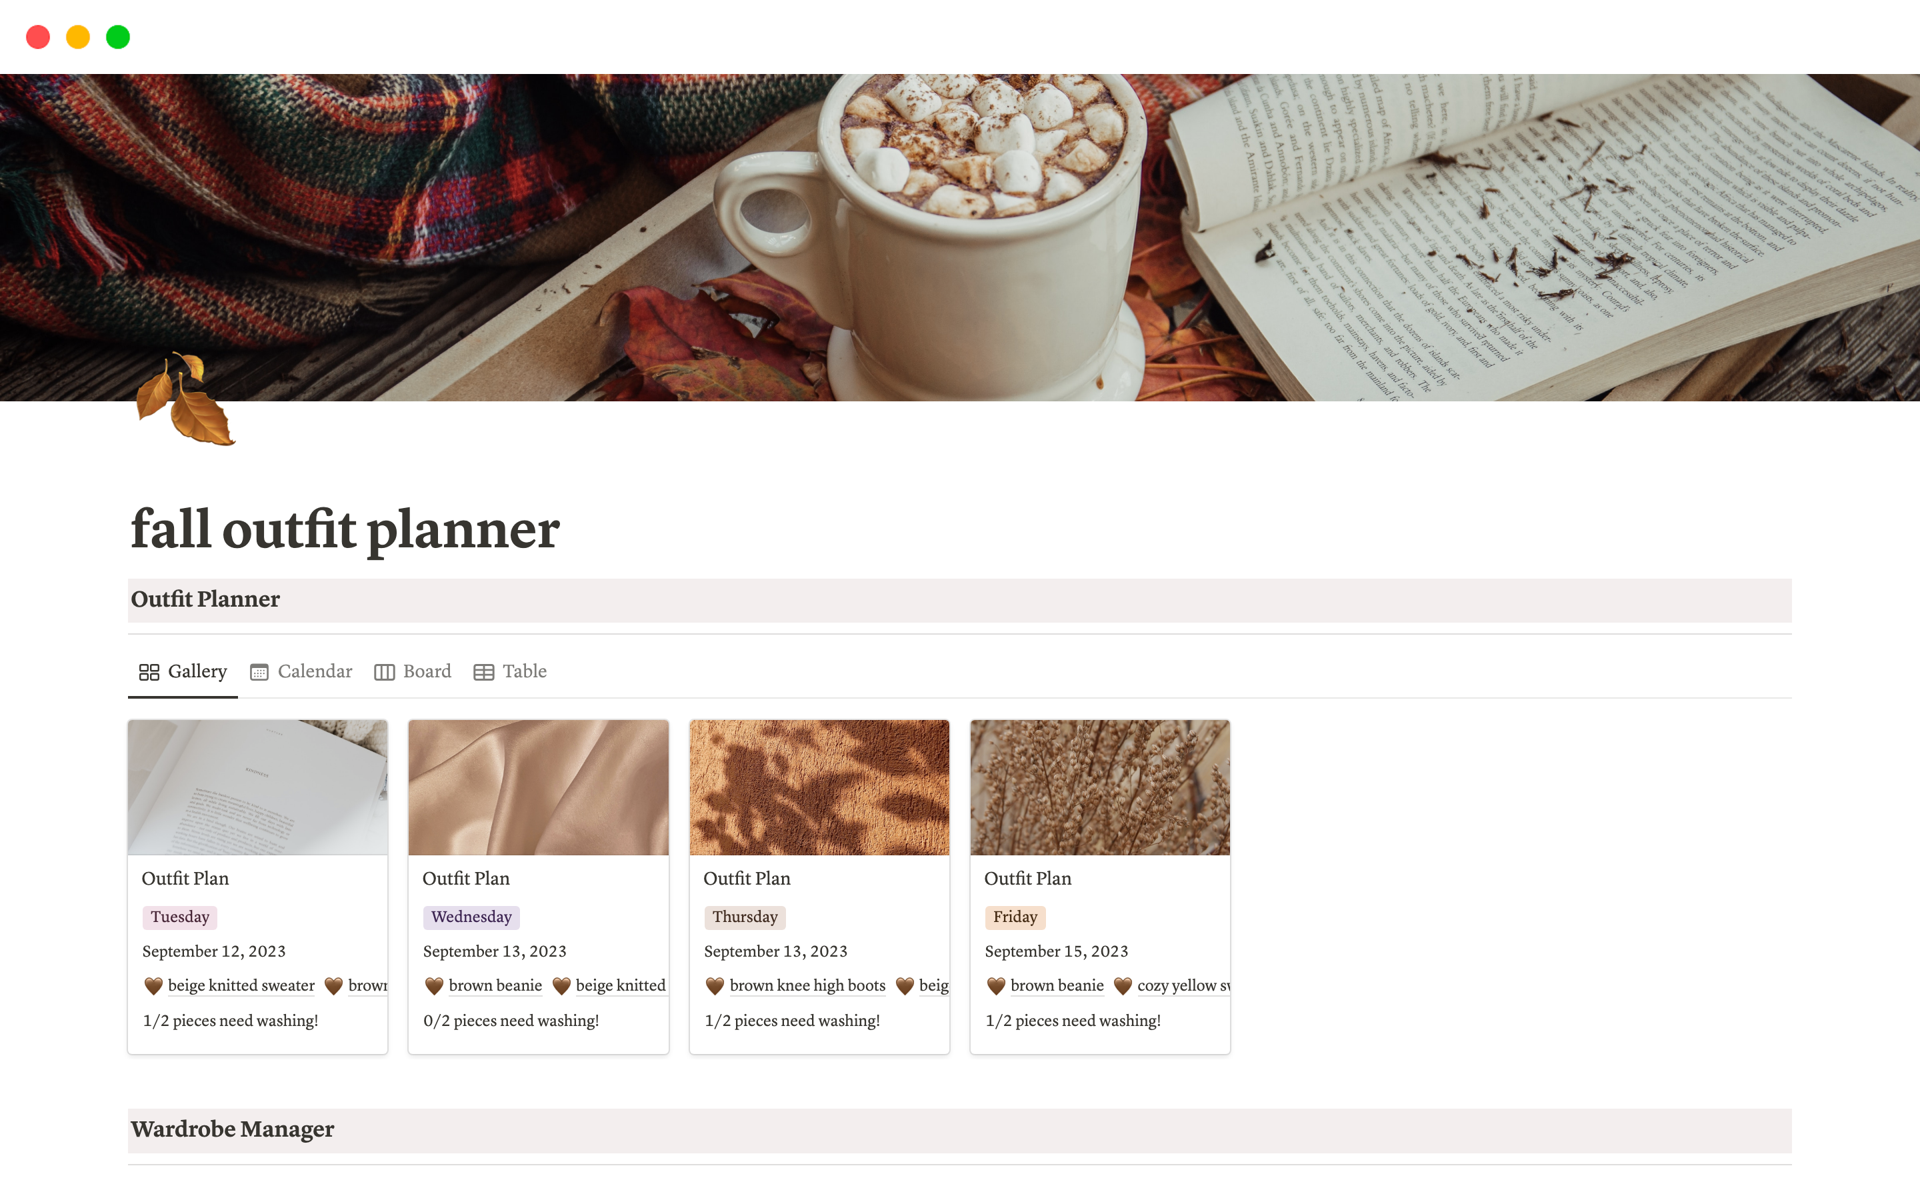 This is a fully functional, ready to use Notion outfit planner to help you manage clothing items and plan weekly outfits! 